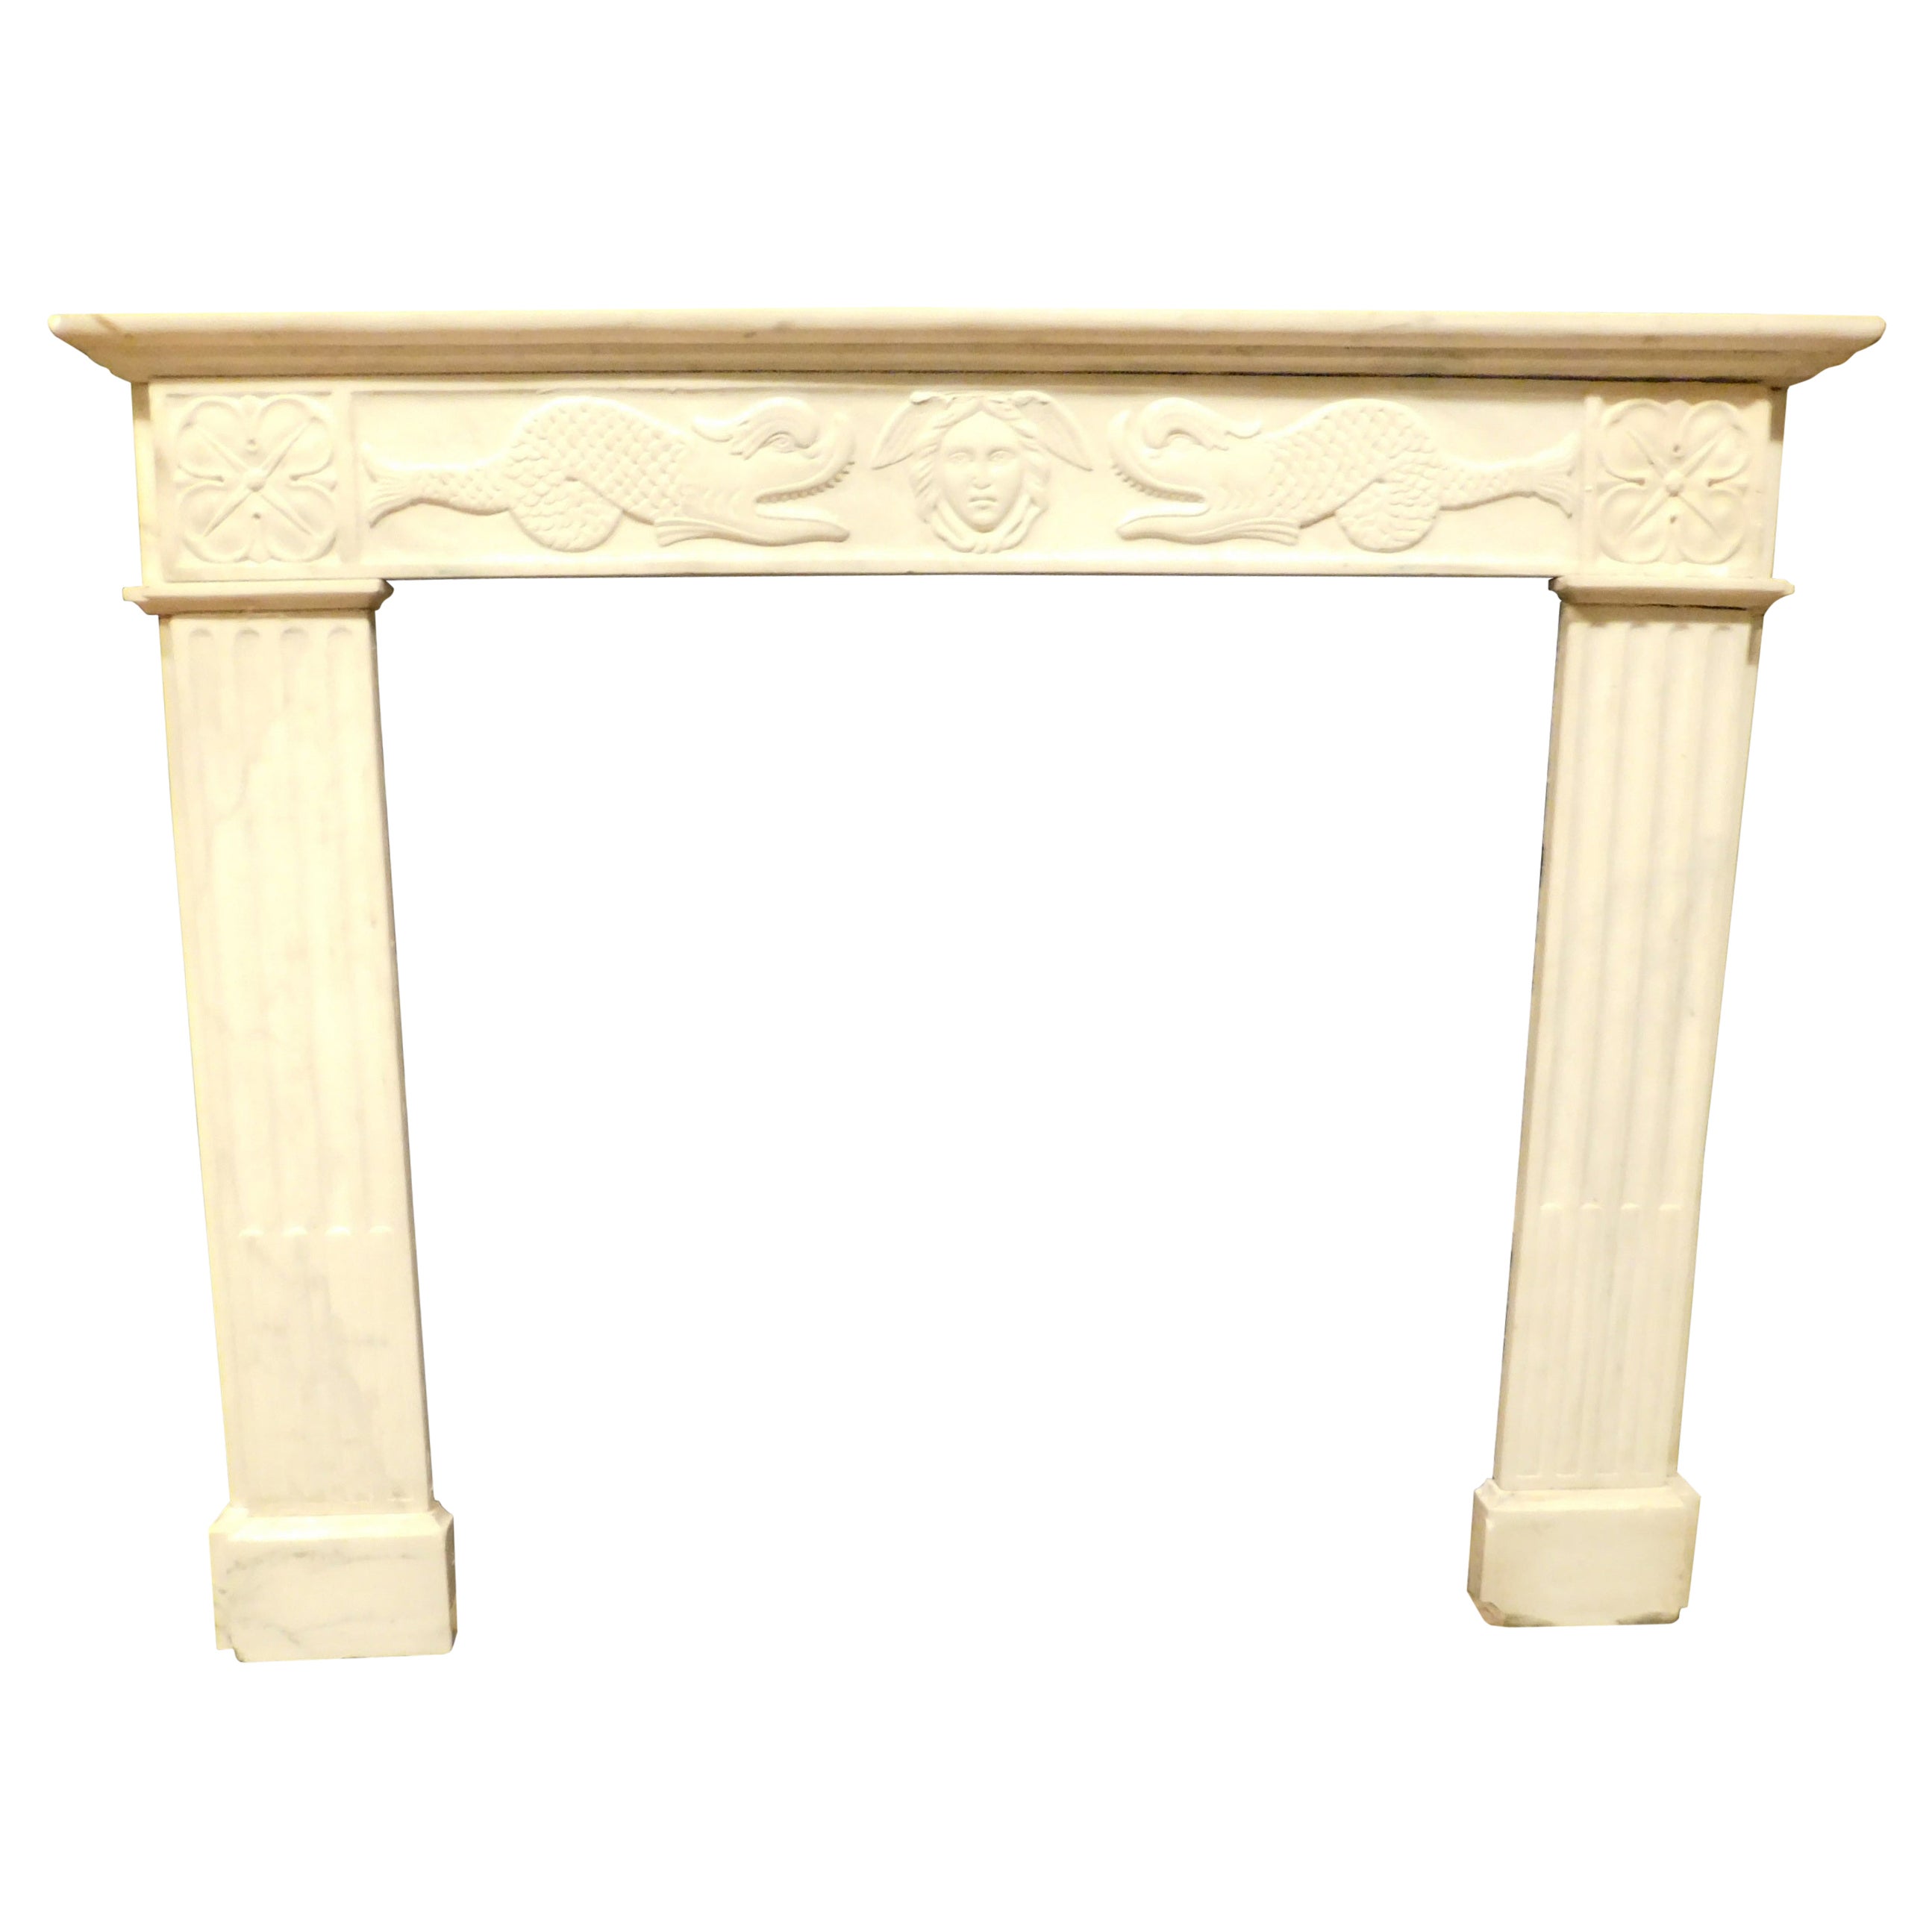 Mantel Fireplace in White Carrara Marble, 19th Century Italy